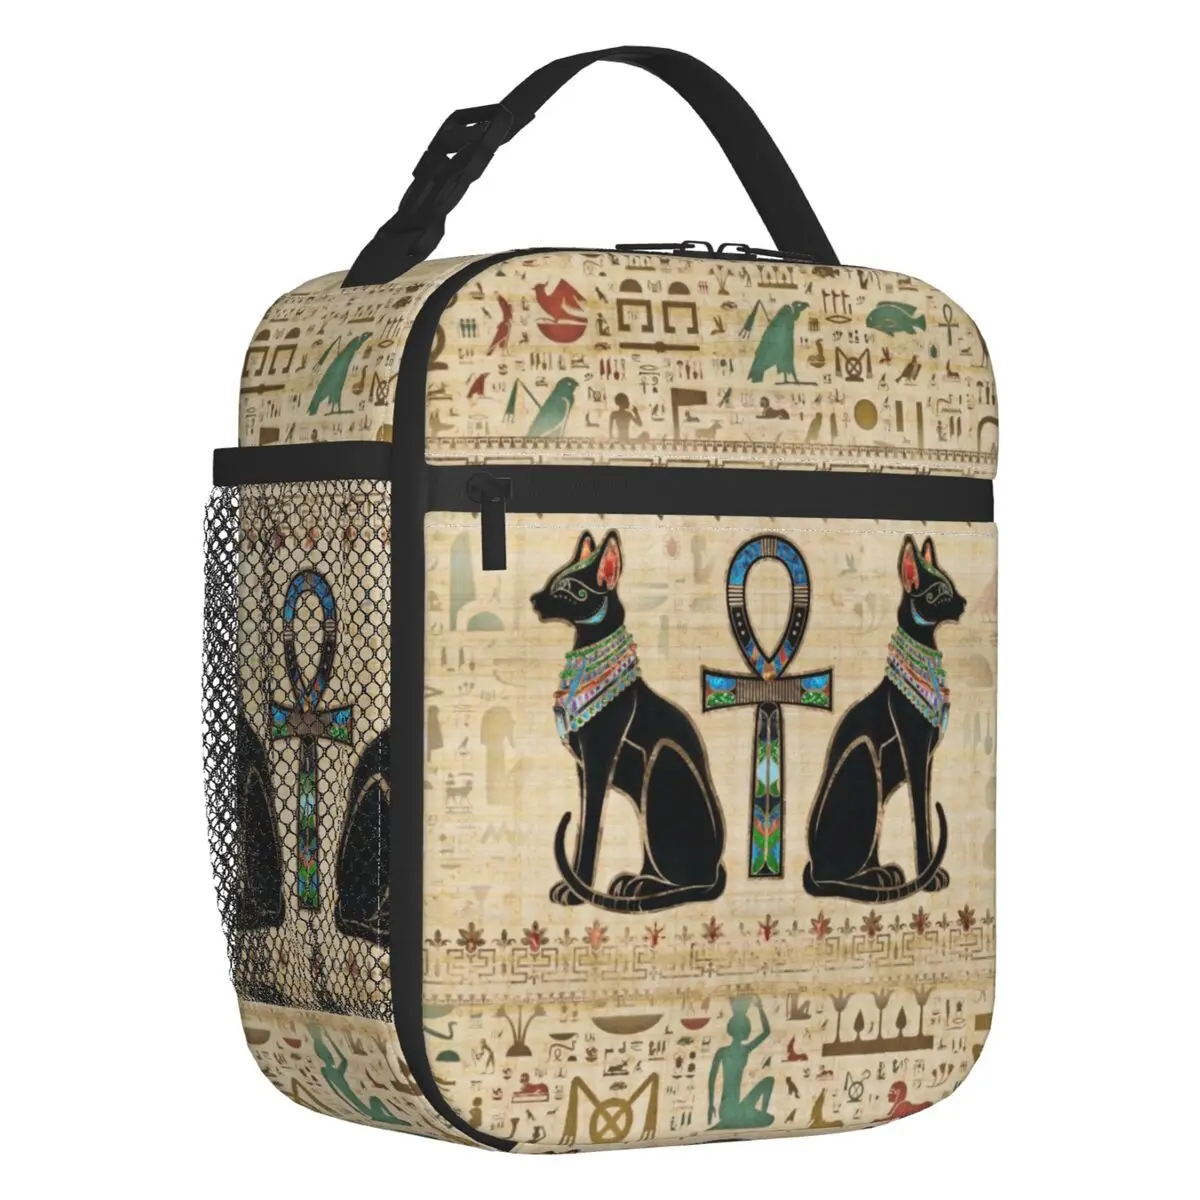 Egyptian Cats And Ankh Cross Insulated Lunch Bags for Women Ancient Egypt Resuable Thermal Cooler Bento Box Kids School Children